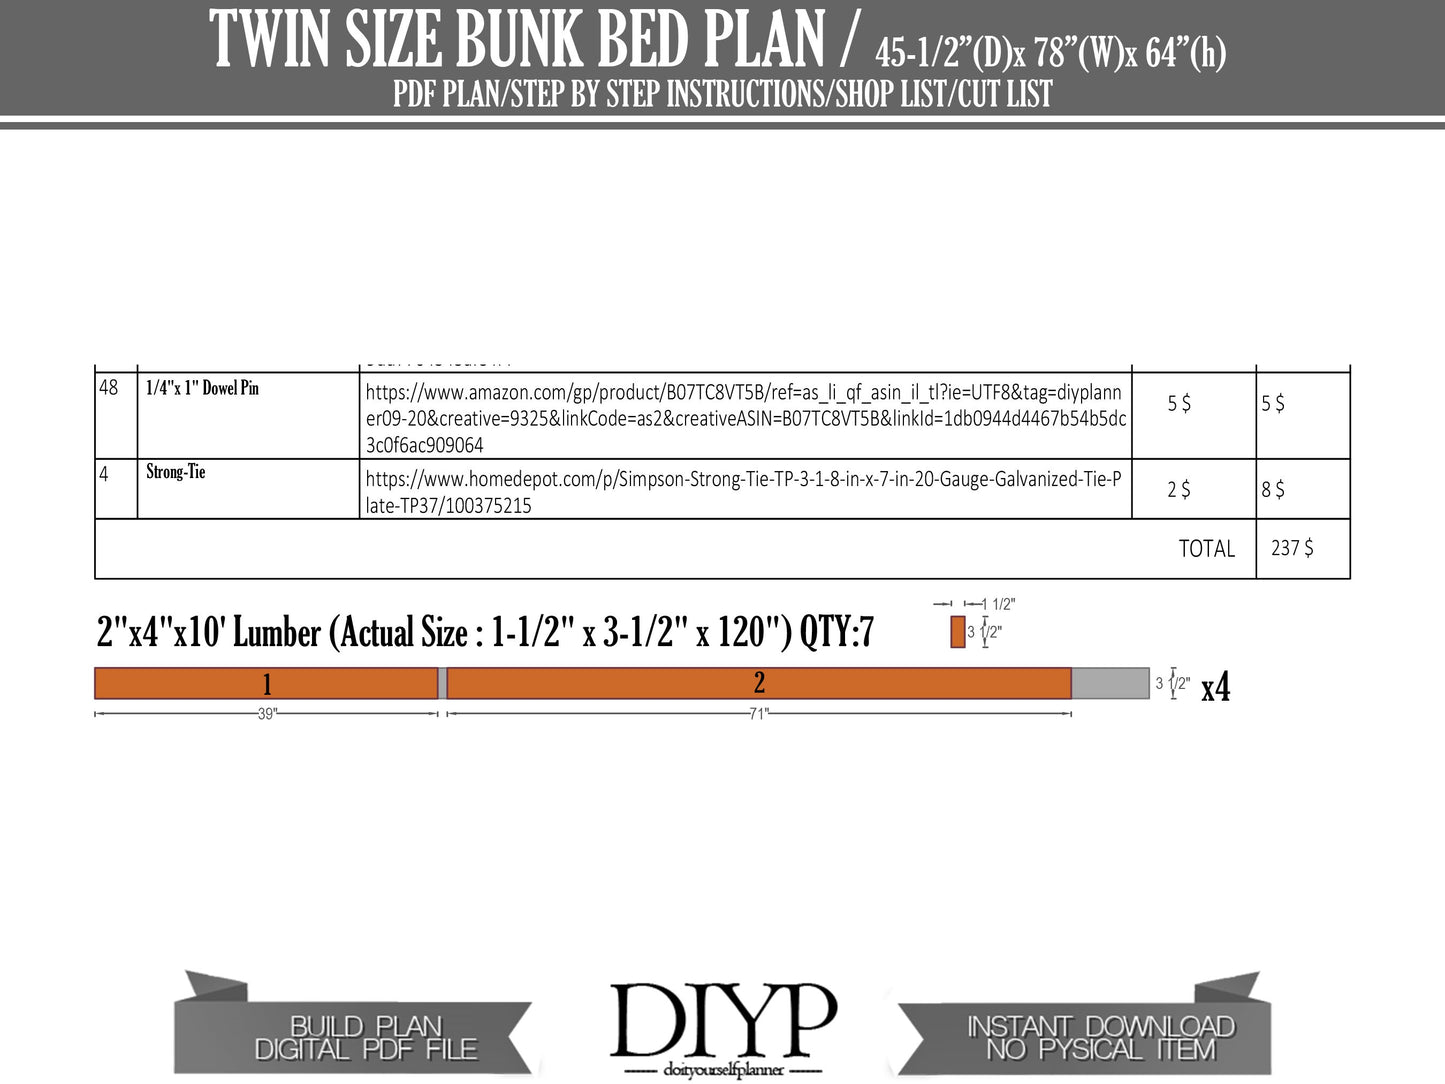 Easy and cheap bunk ben plans , build plans for wooden twin size bunk bed